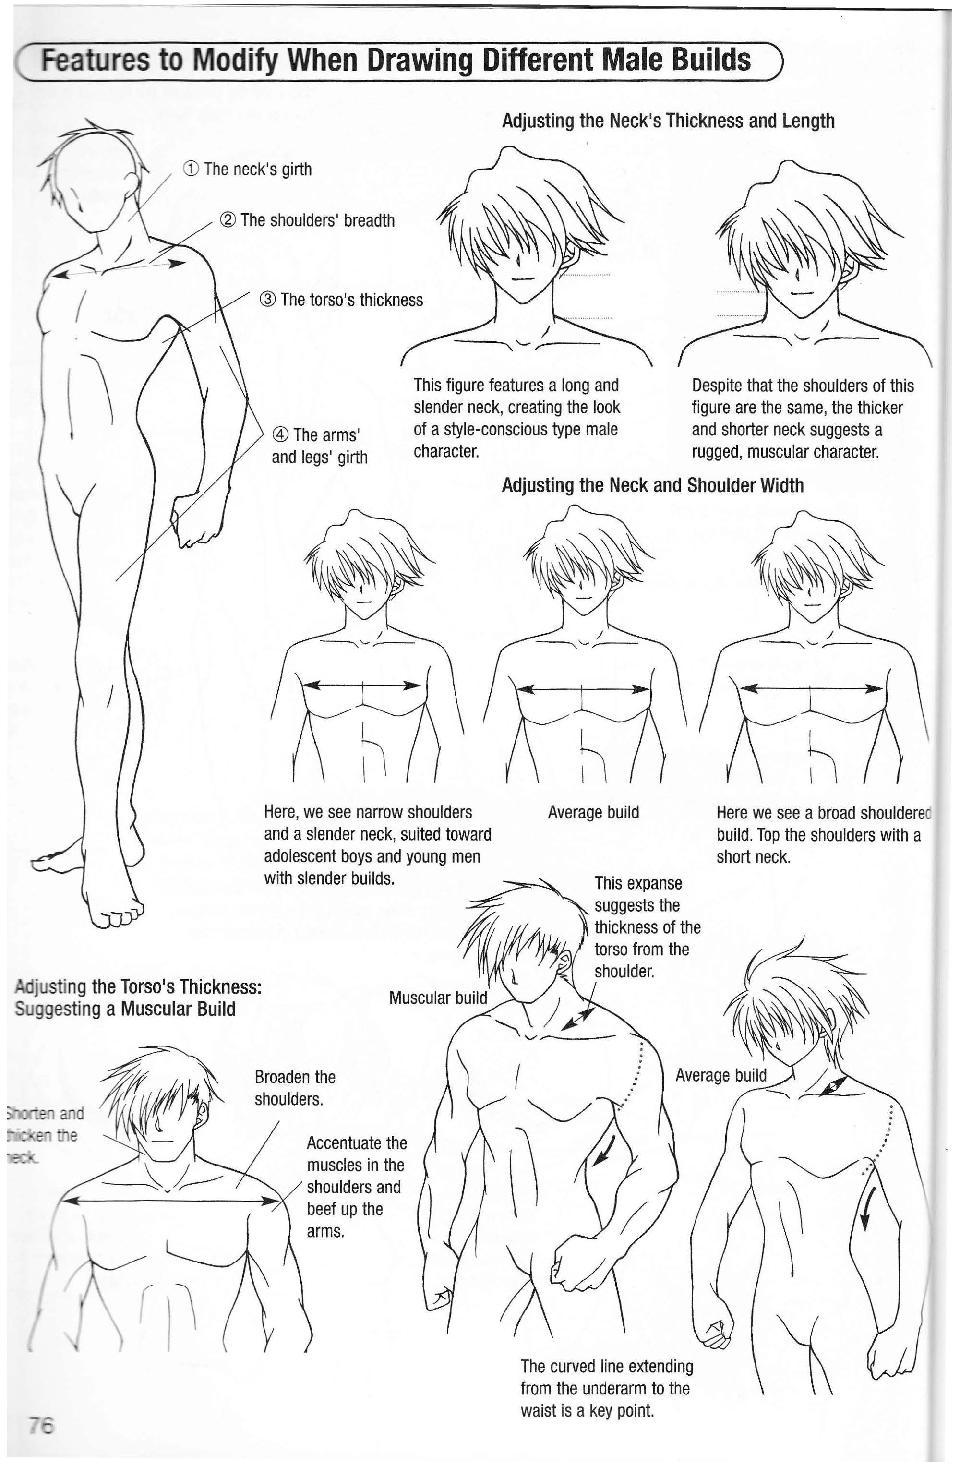 More How to Draw Manga Vol. 2 - Penning Characters 77